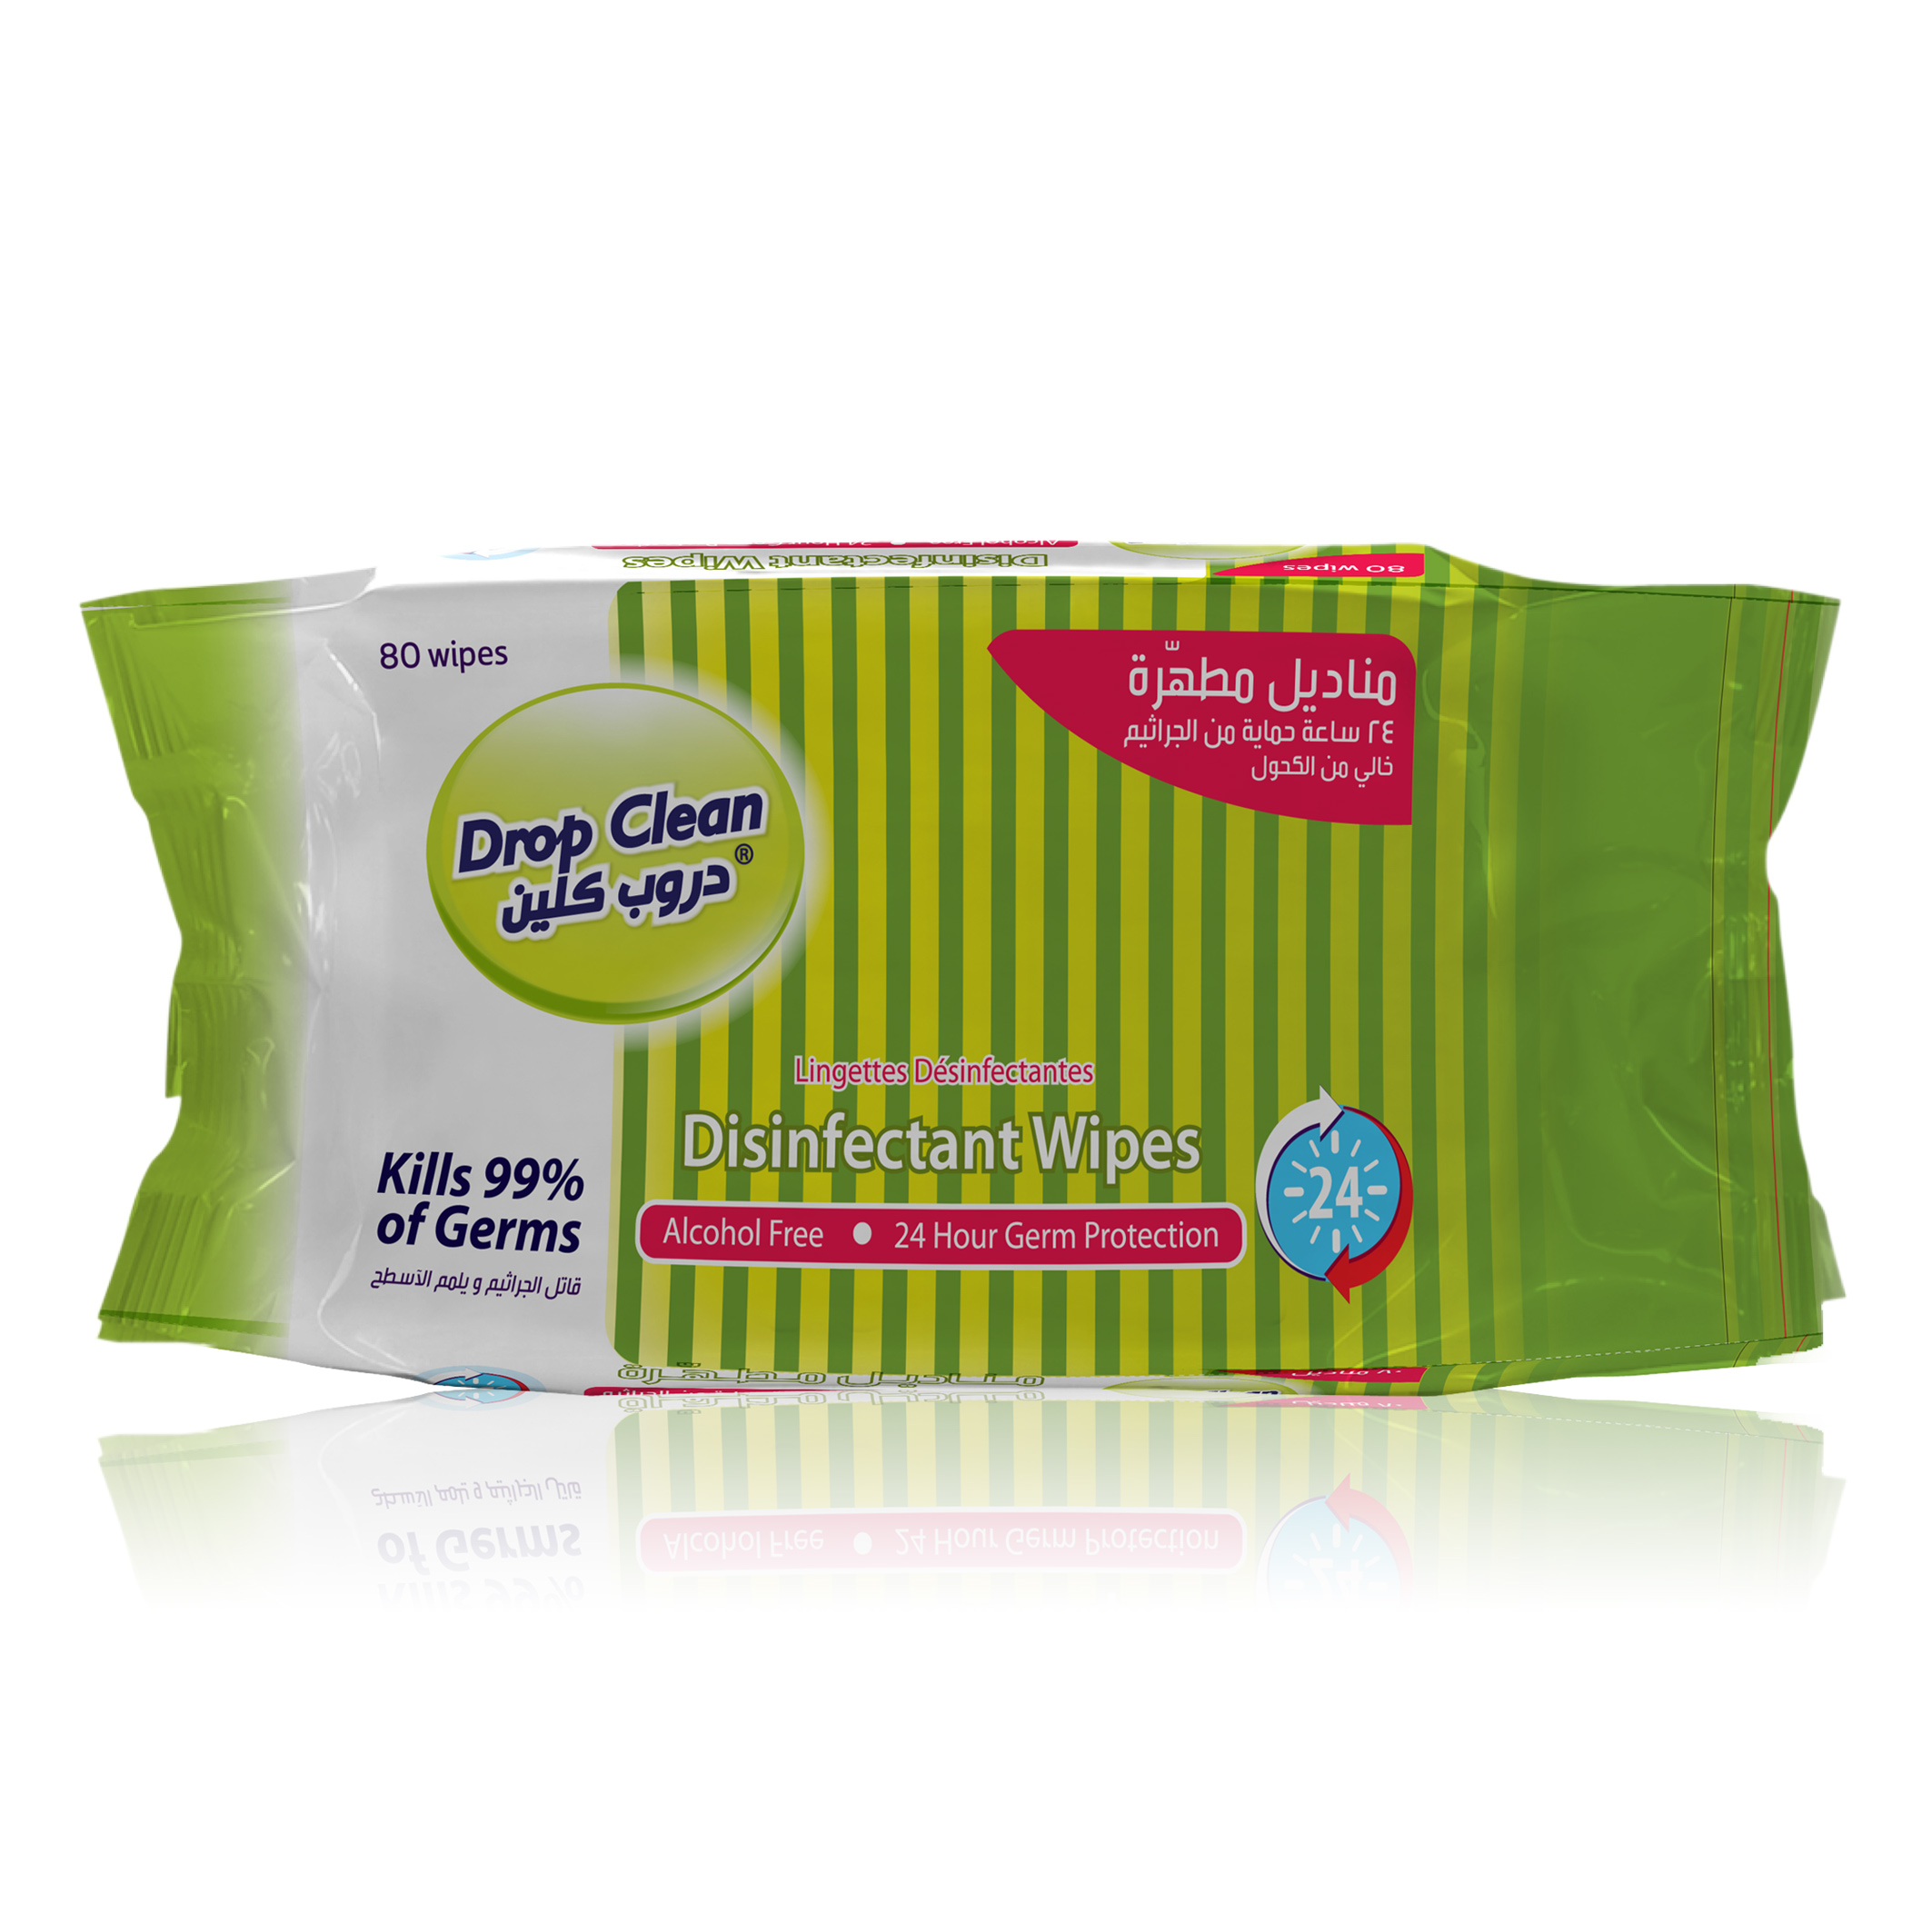 Drop Clean Disinfectant Wipes